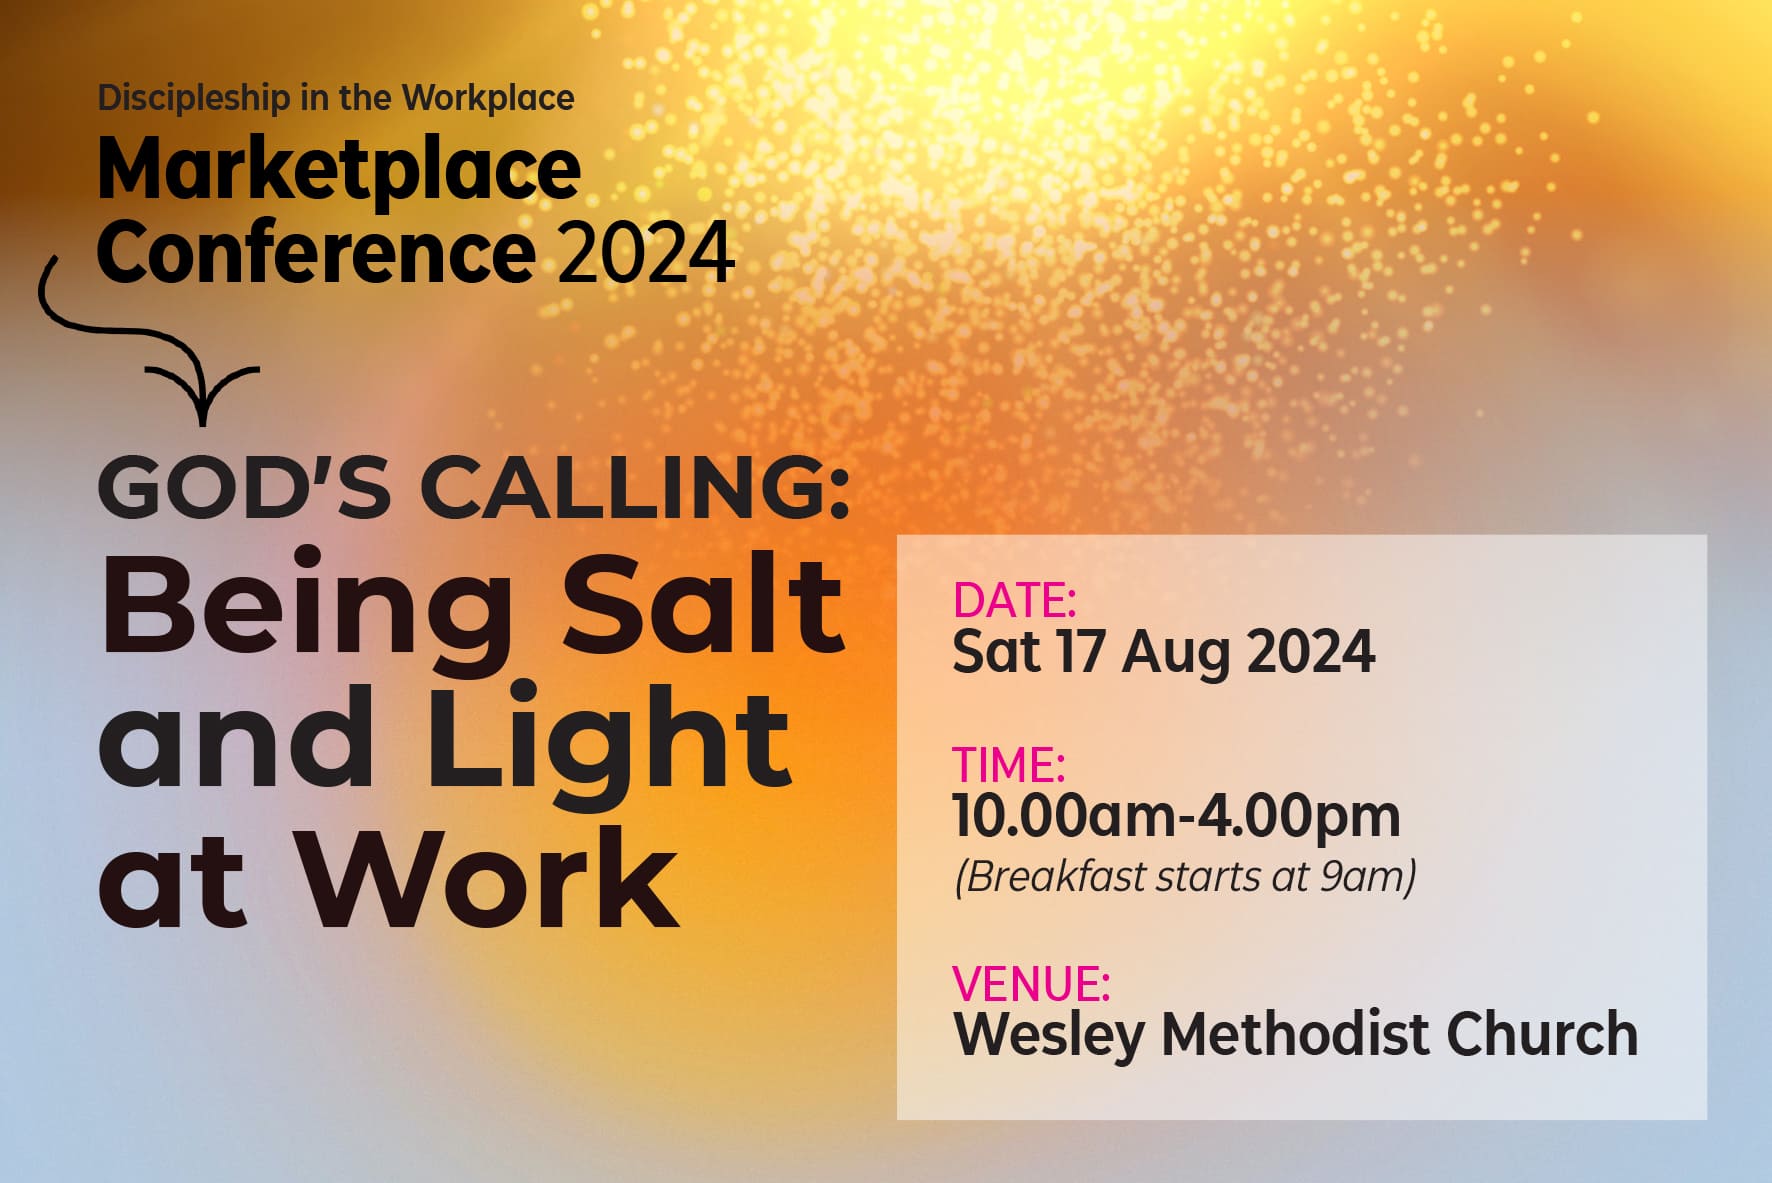 Marketplace Conference 2024 - God's Calling:Being Salt and Light at Work